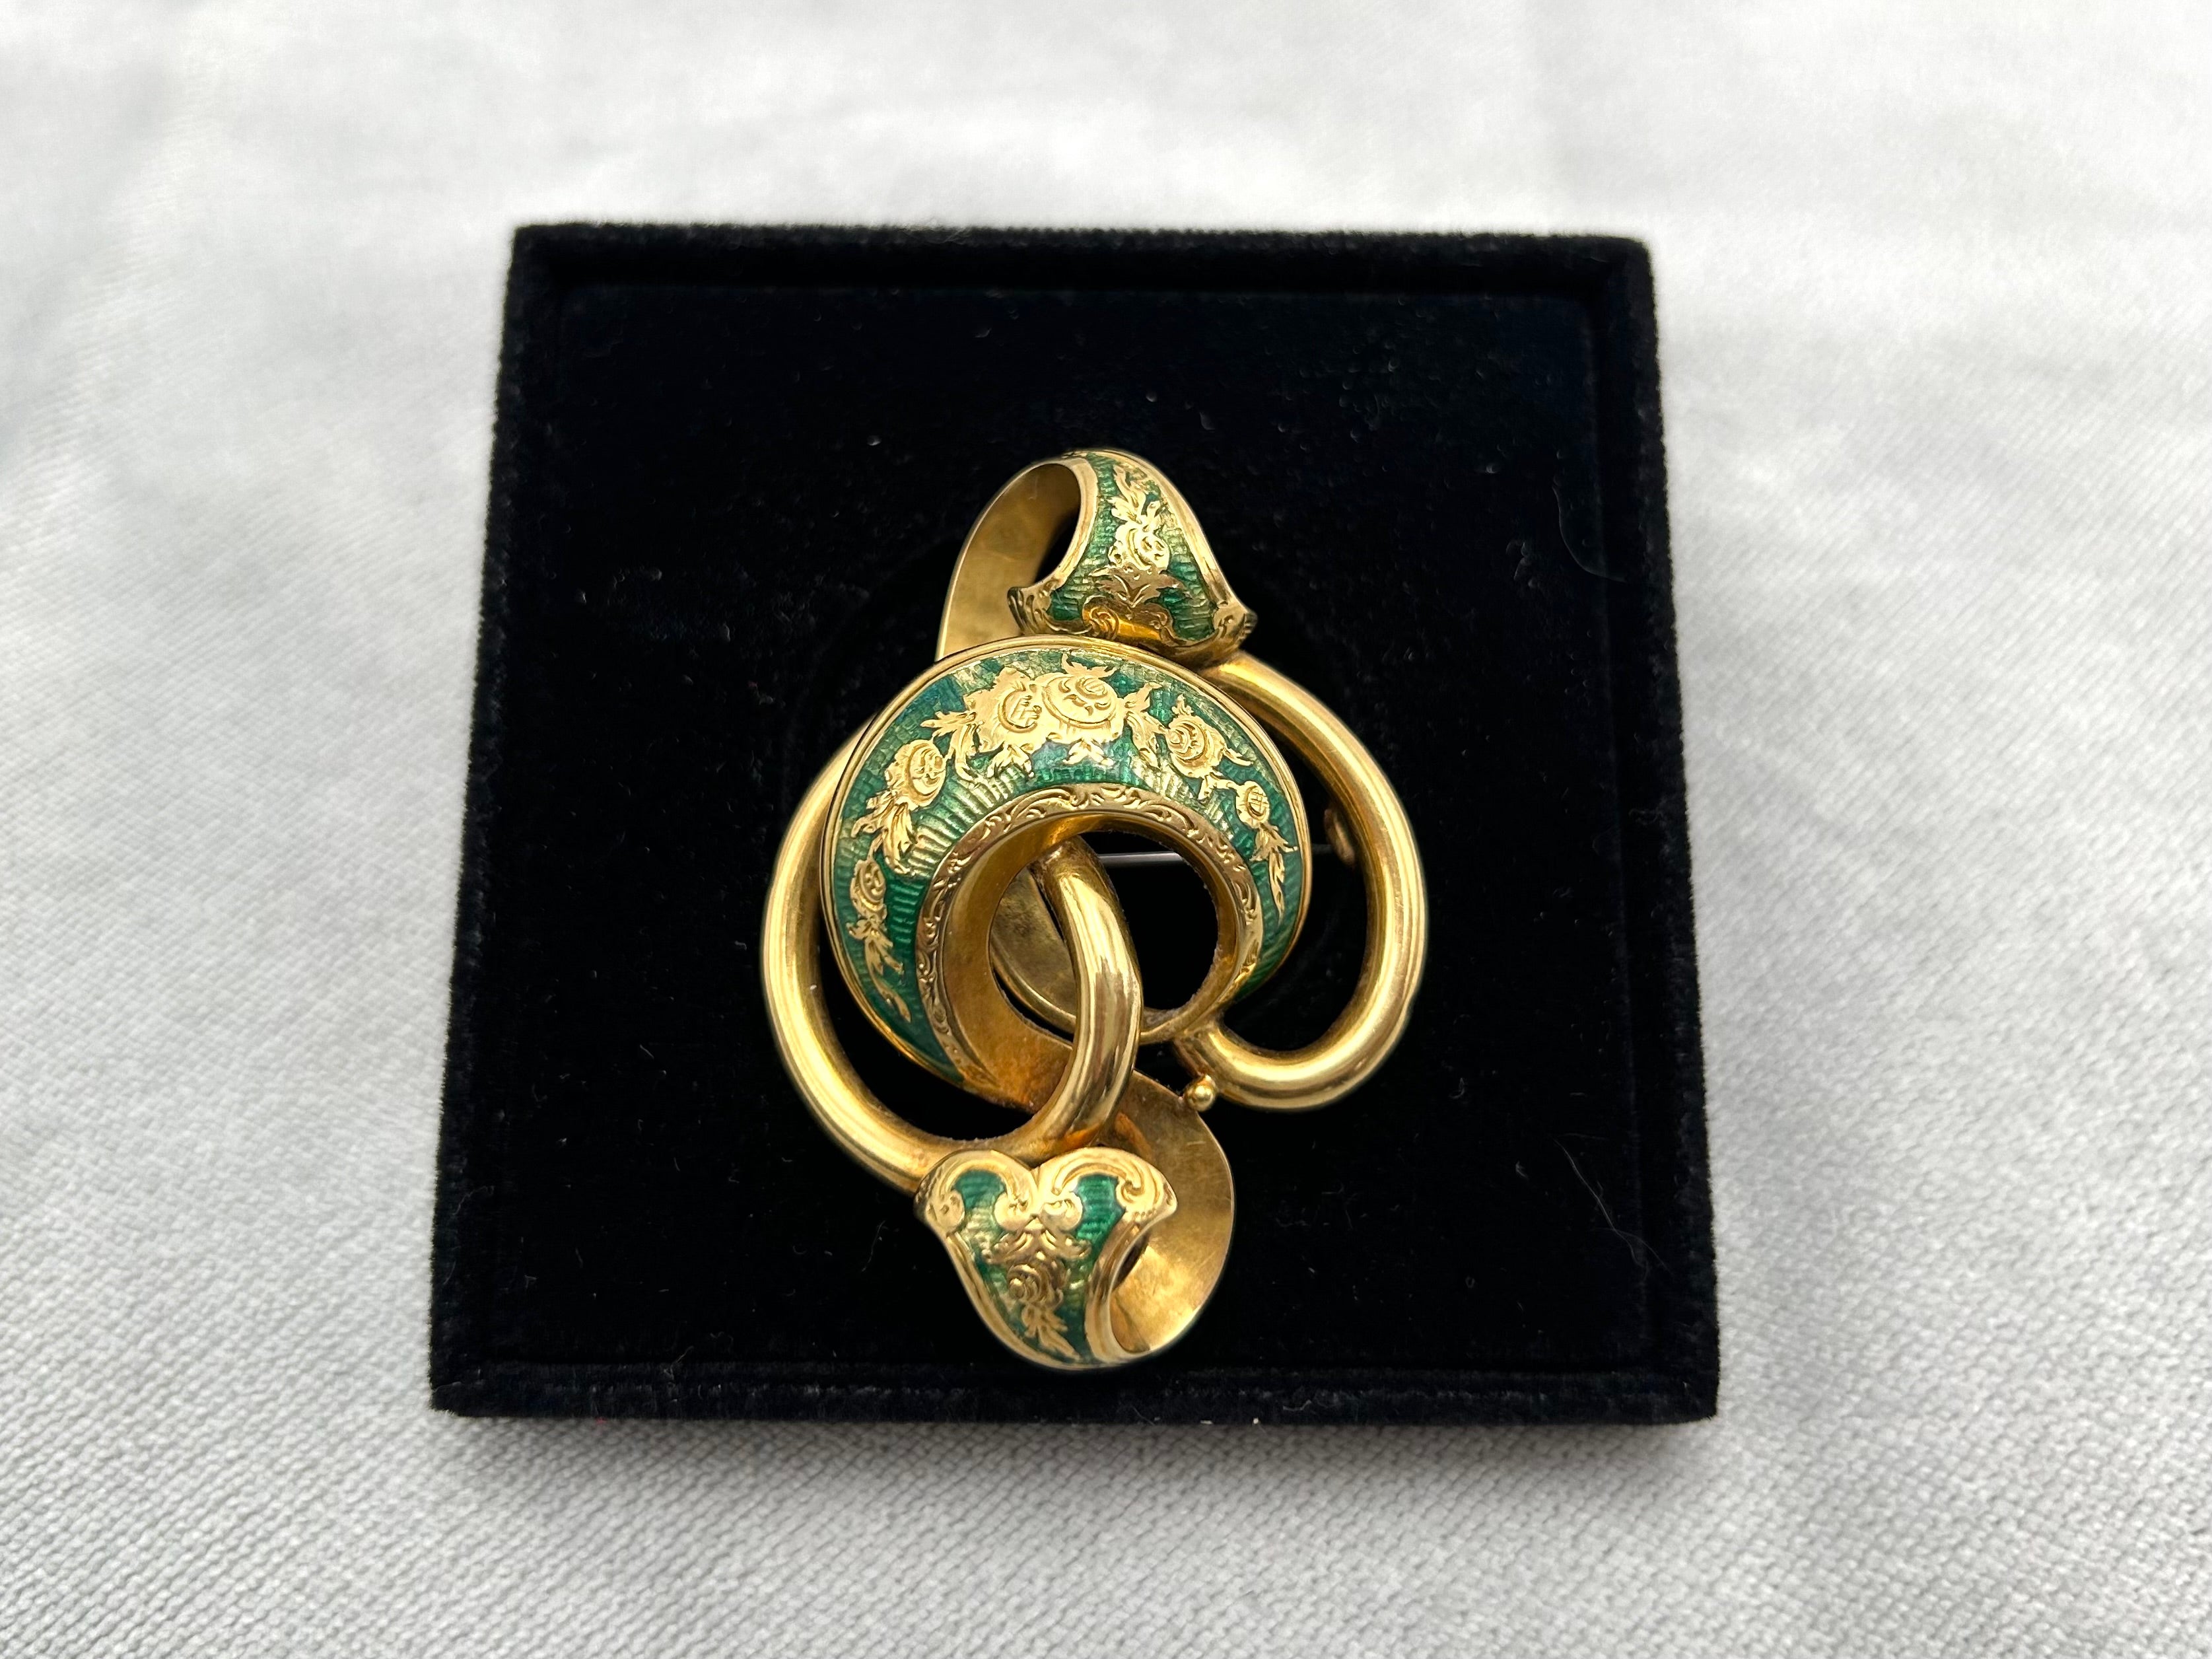 Old gold brooch with the function of a pendant in the Biedermeier style.
Brooch in the shape of an engraved ribbon with green enamel.
Made of 750 gold, marked with the Swedish hallmark
Very good condition, slight wear to the enamel
Year: around